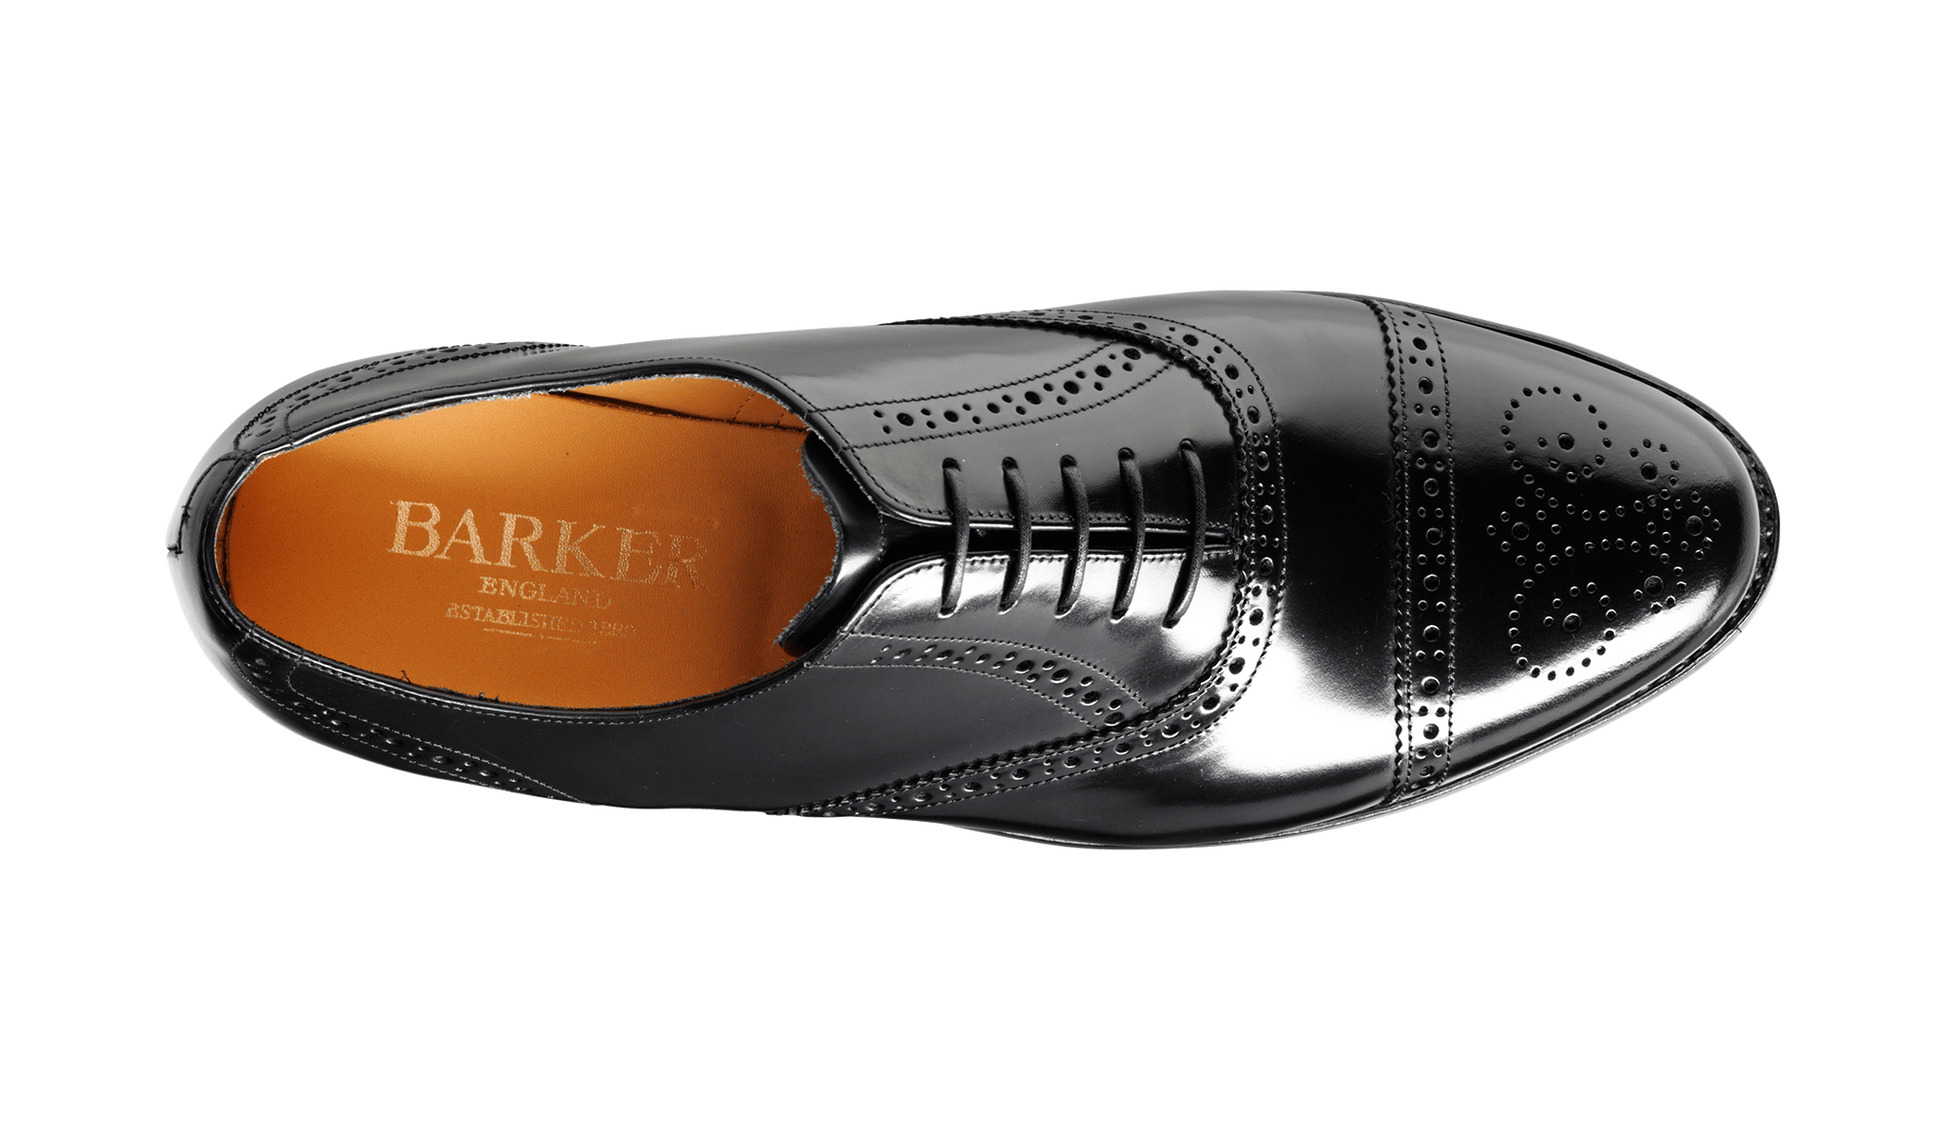 Barker Men's Alfred Leather Brogue shoes 6643/37 - British Shoe Company